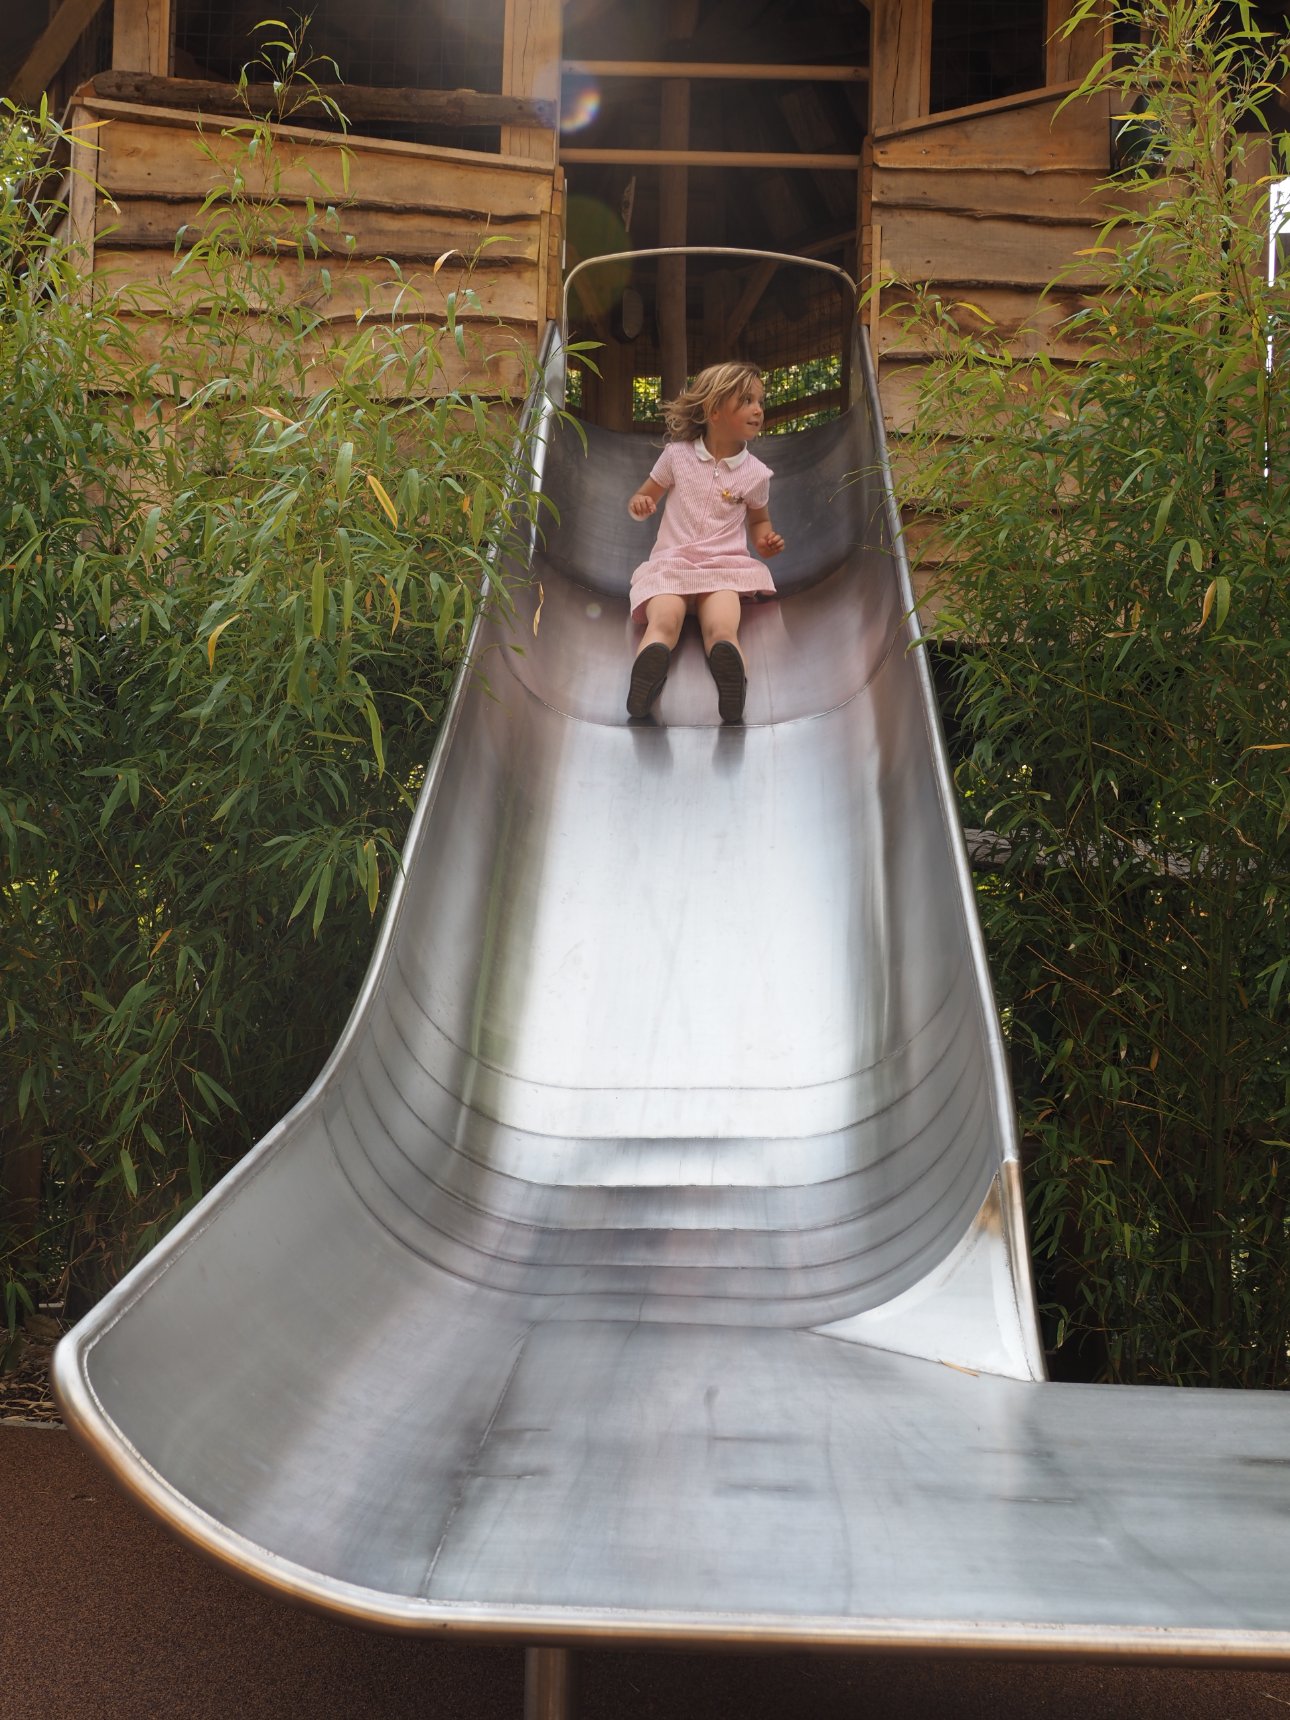 Young child on a slide.